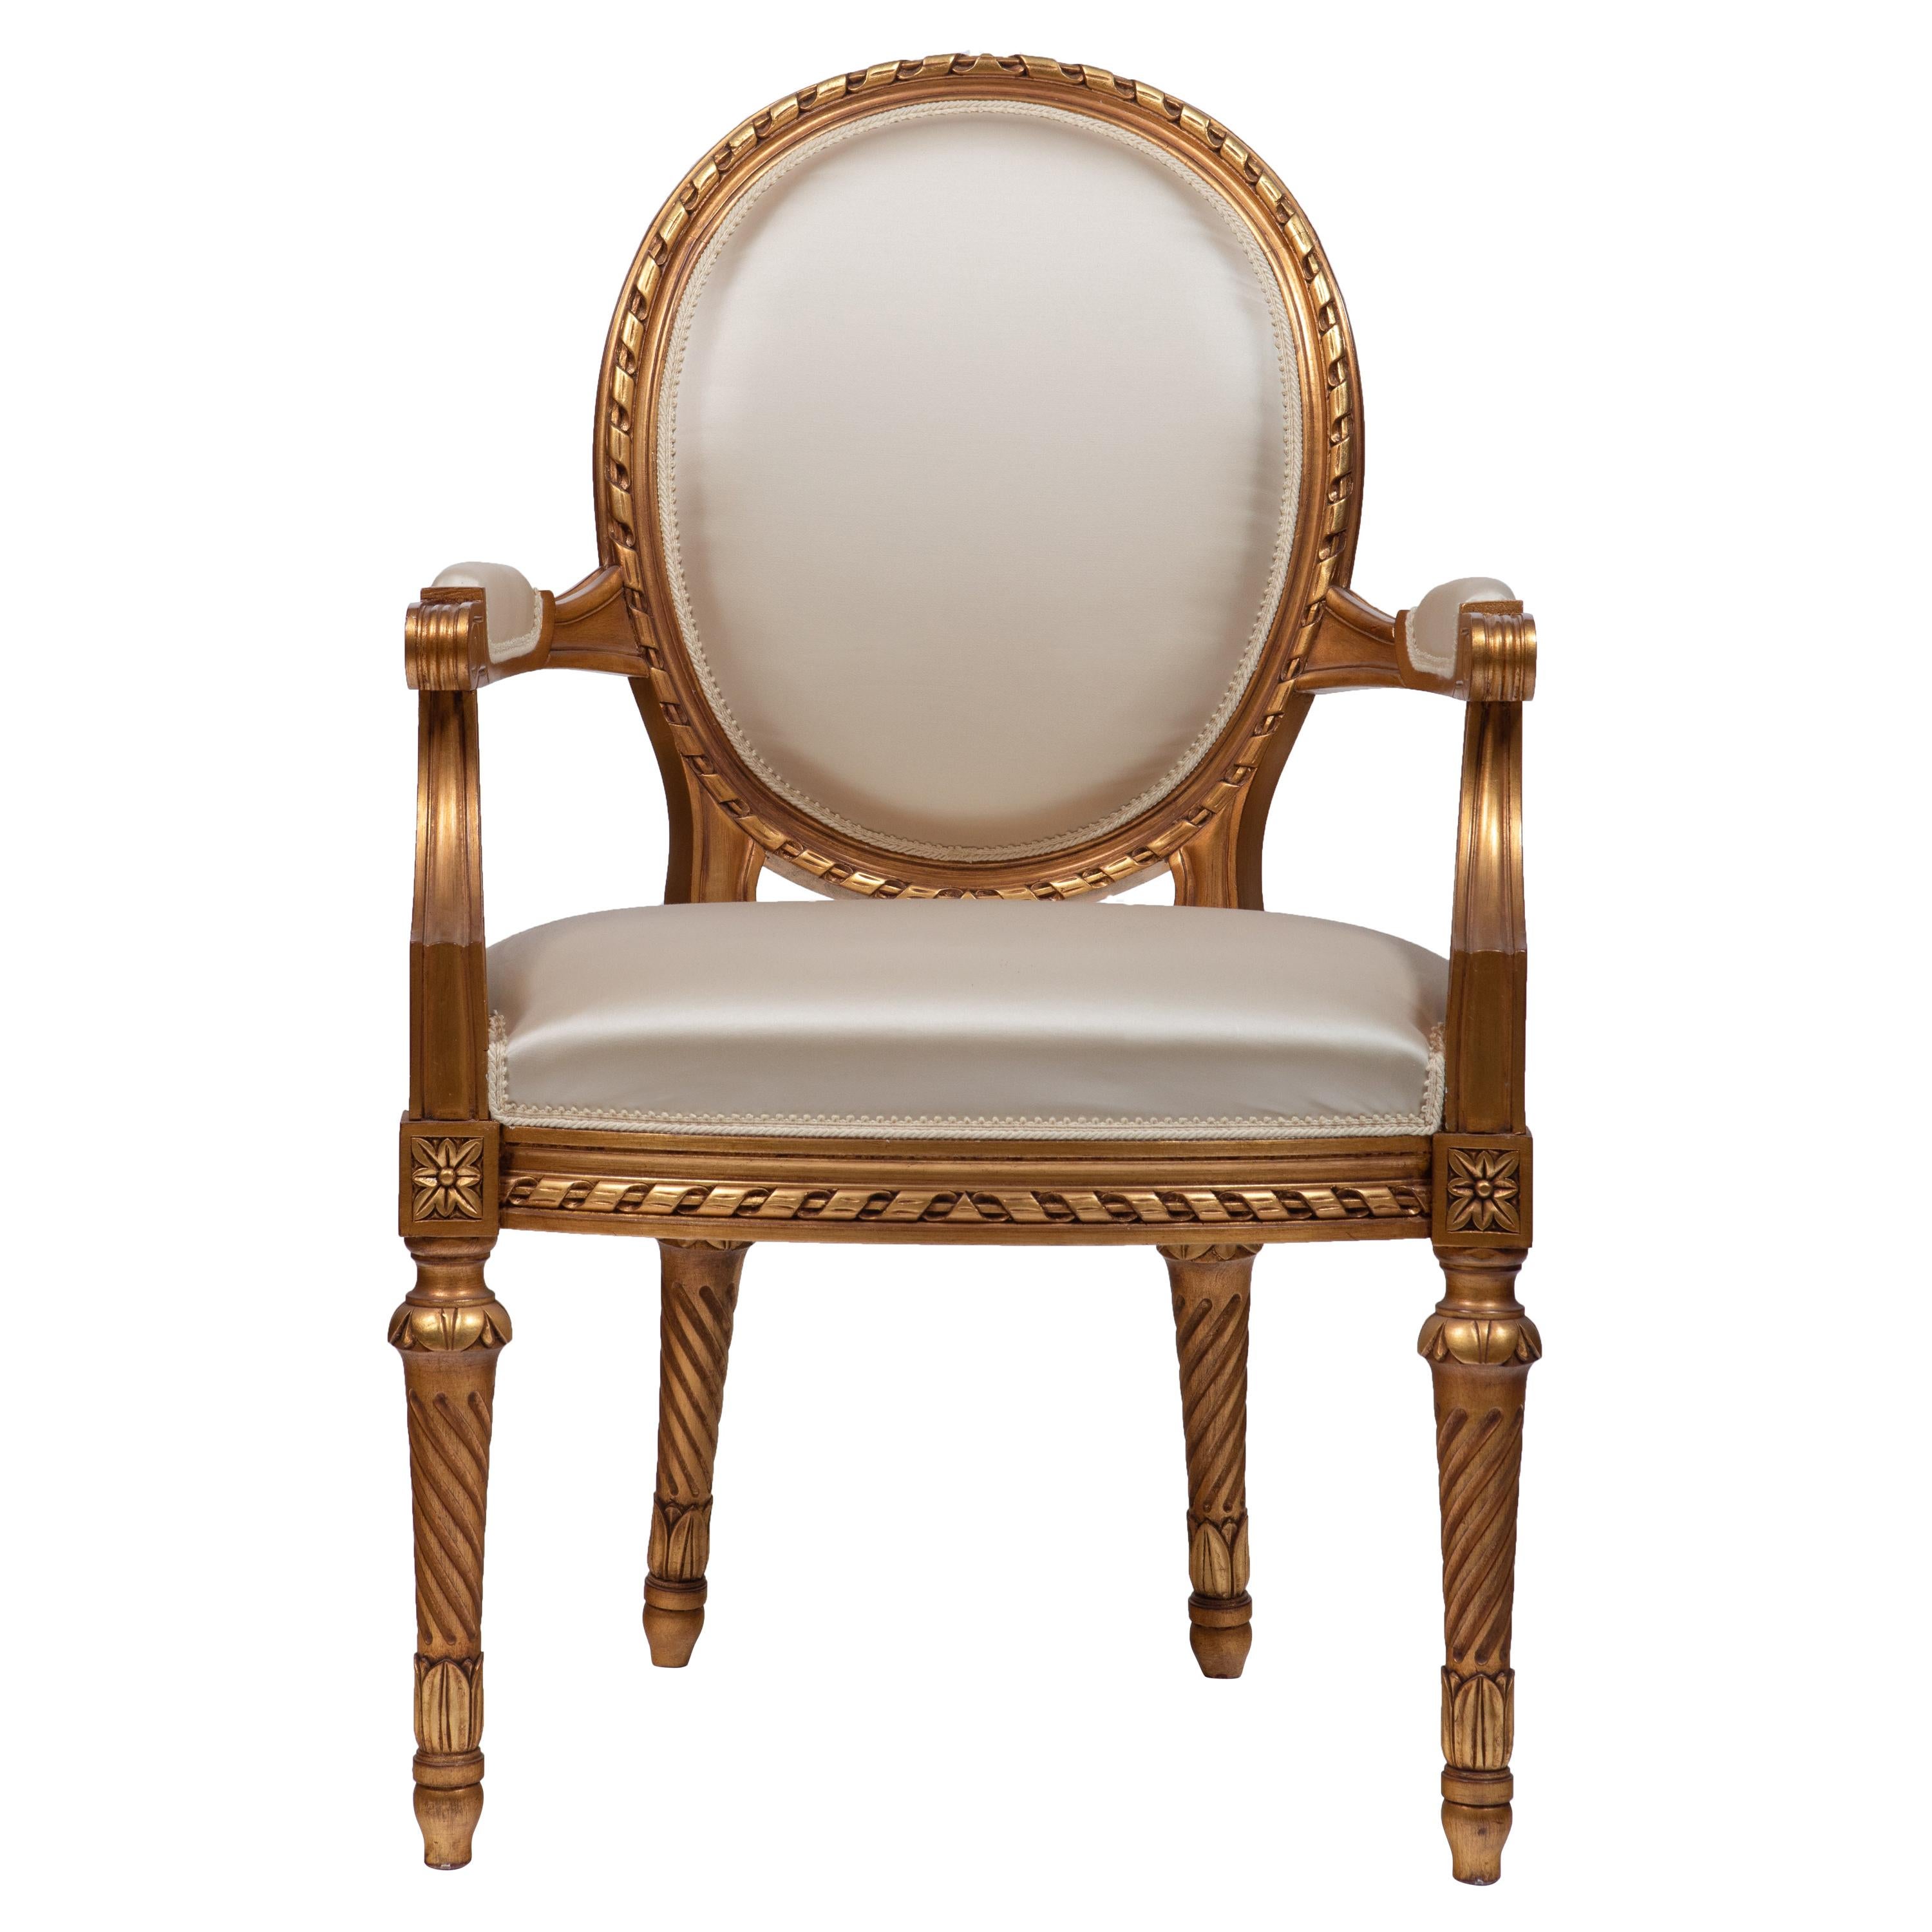 Luis XVI Style Armchair, Hand Carved and Gold Leaf Finishing, Made in Italy For Sale